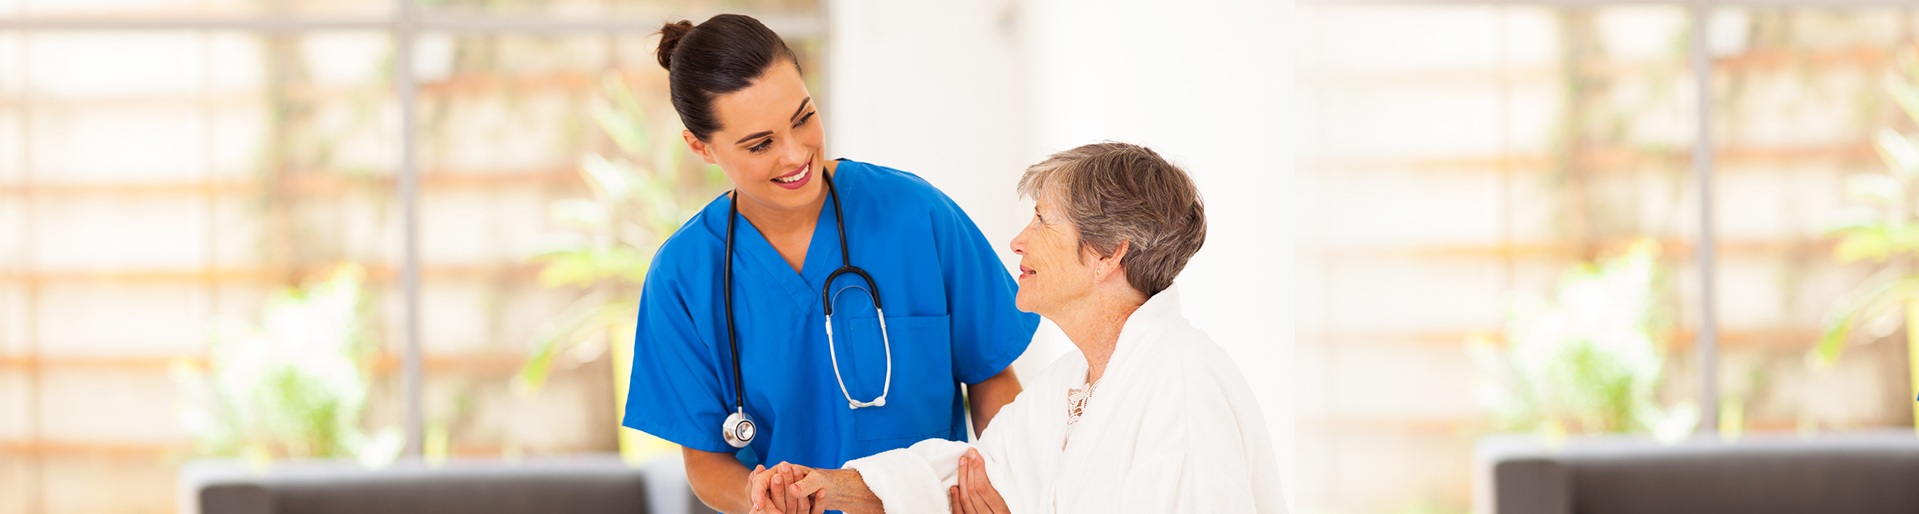 Ascendant Insurance Solutions provides a complete line of insurance products tailored for the healthcare industry.